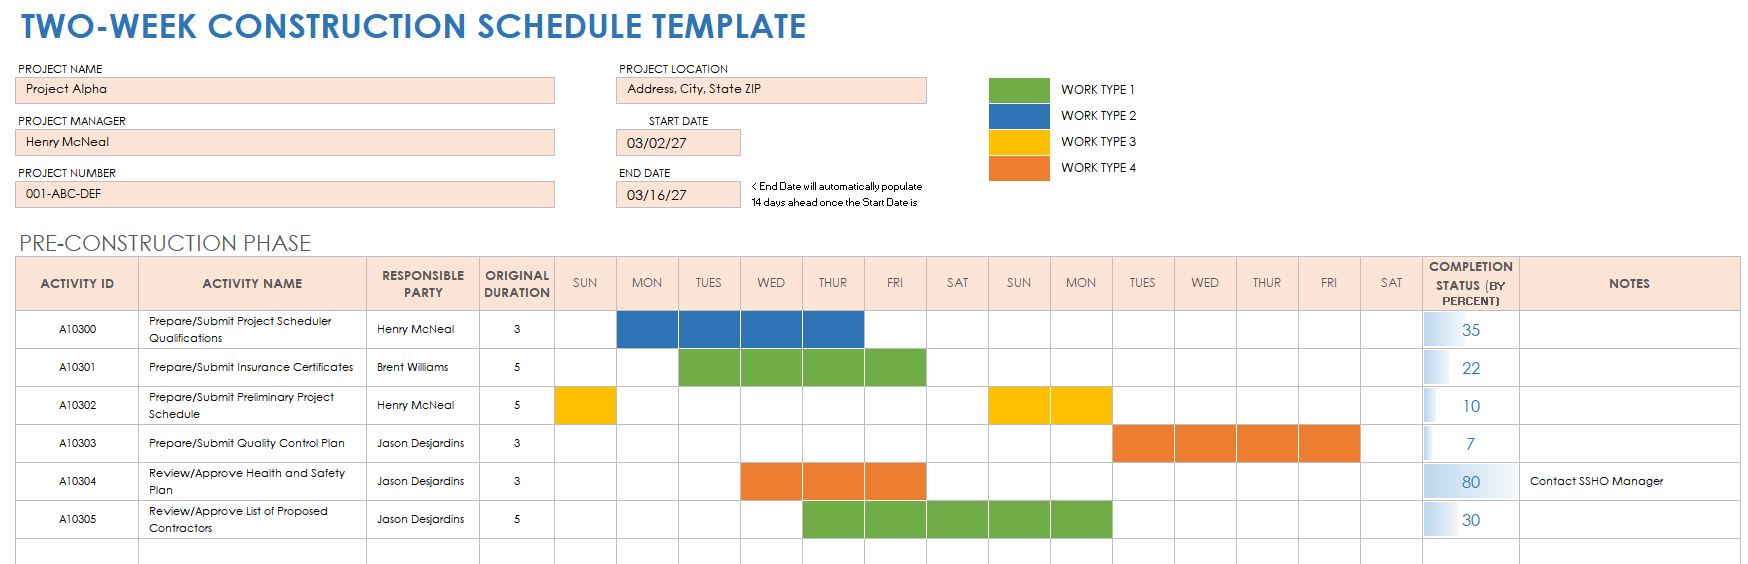 Two Week Construction Schedule